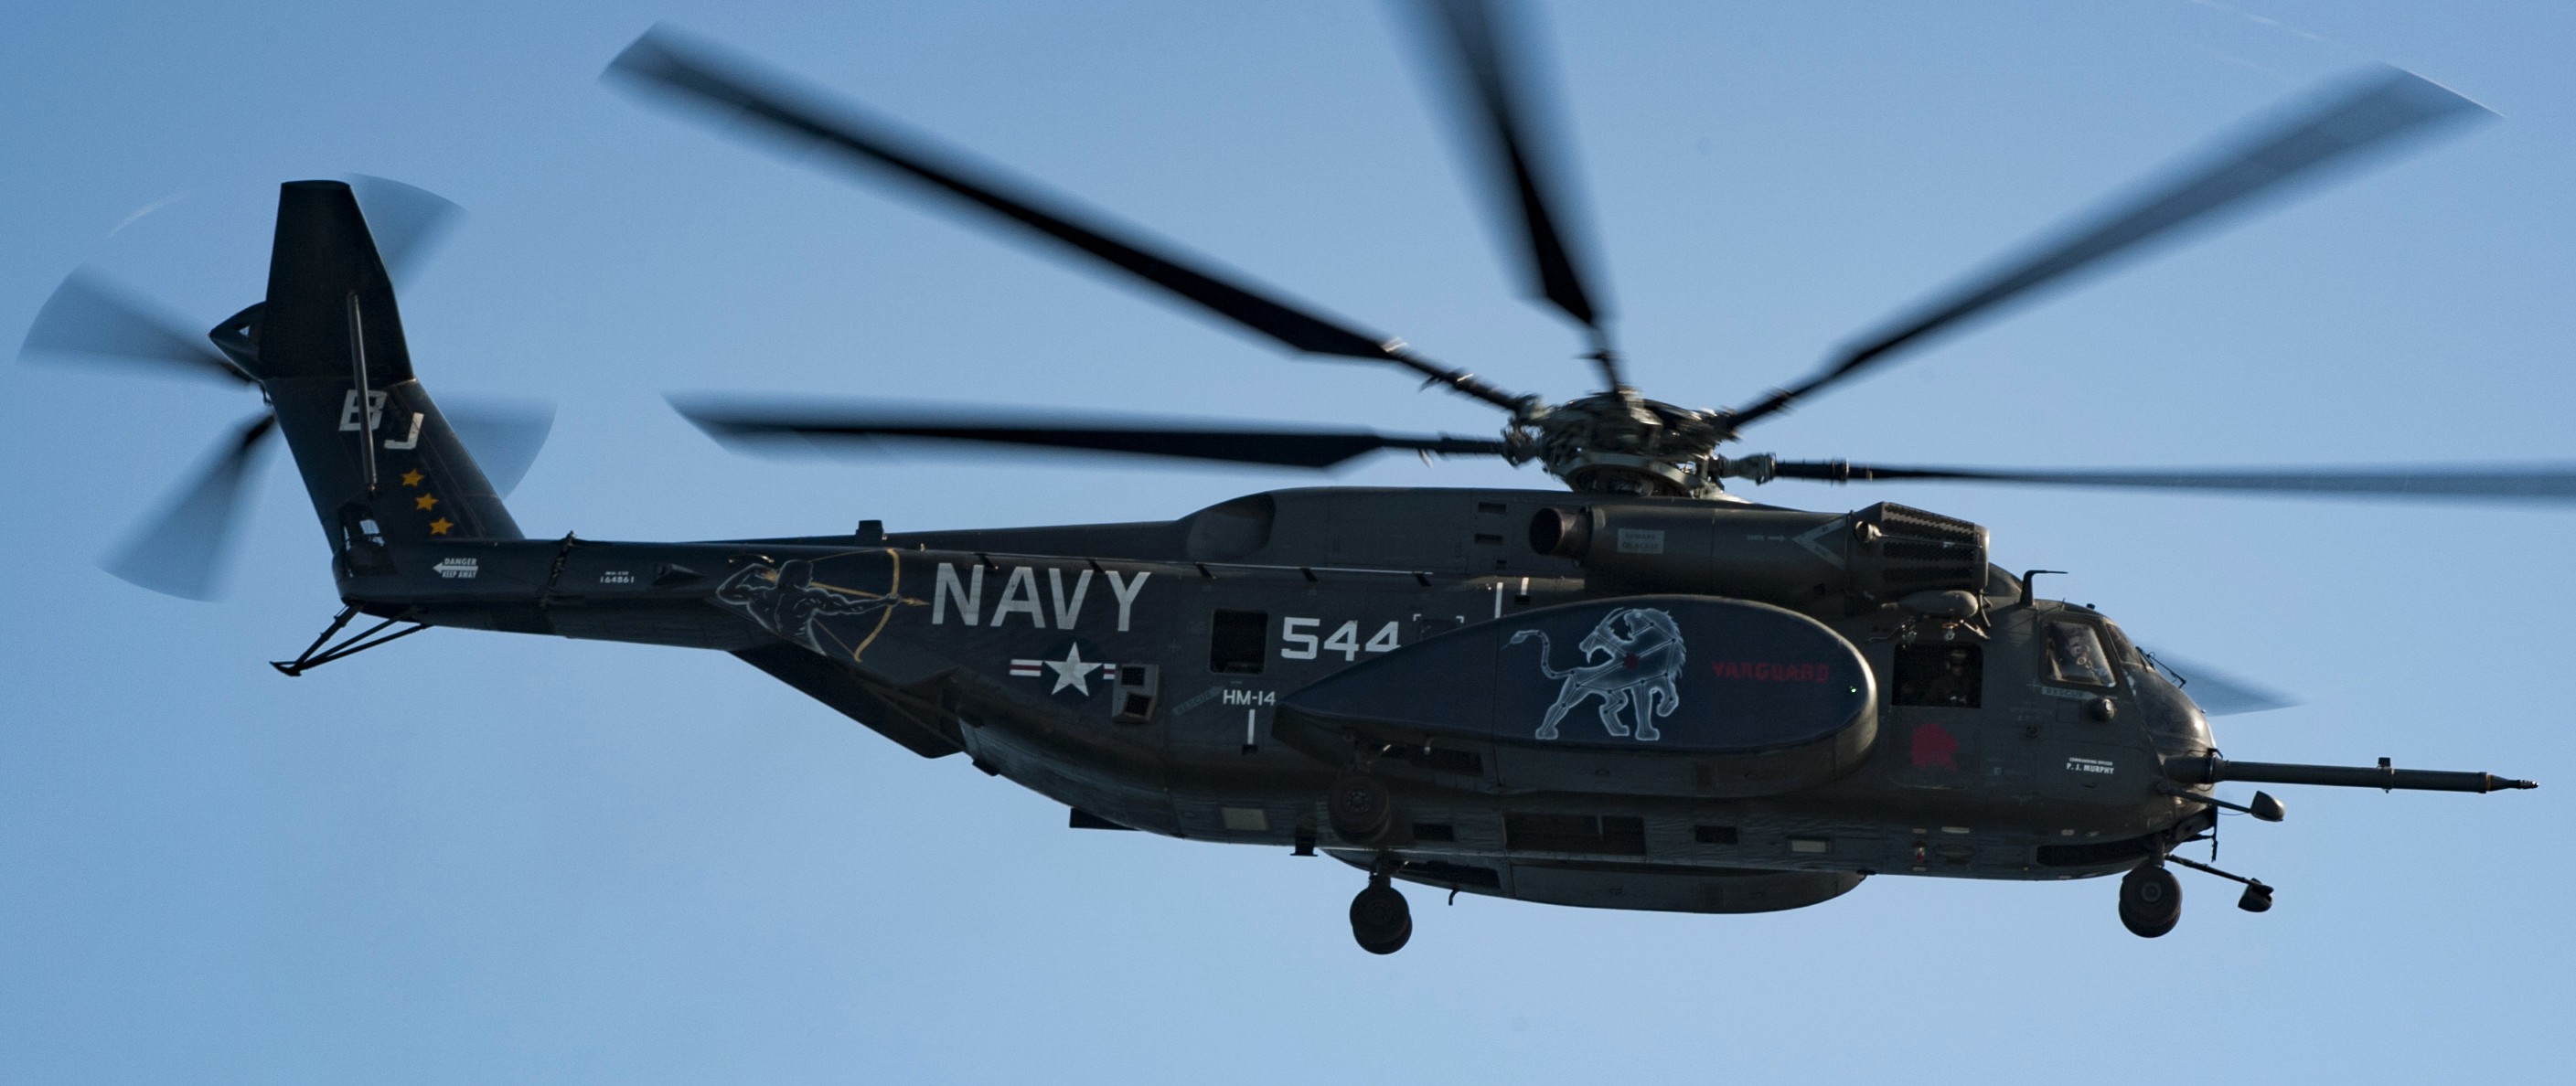 hm-14 vanguard helicopter mine countermeasures squadron navy mh-53e sea dragon 132 uss wasp lhd-1